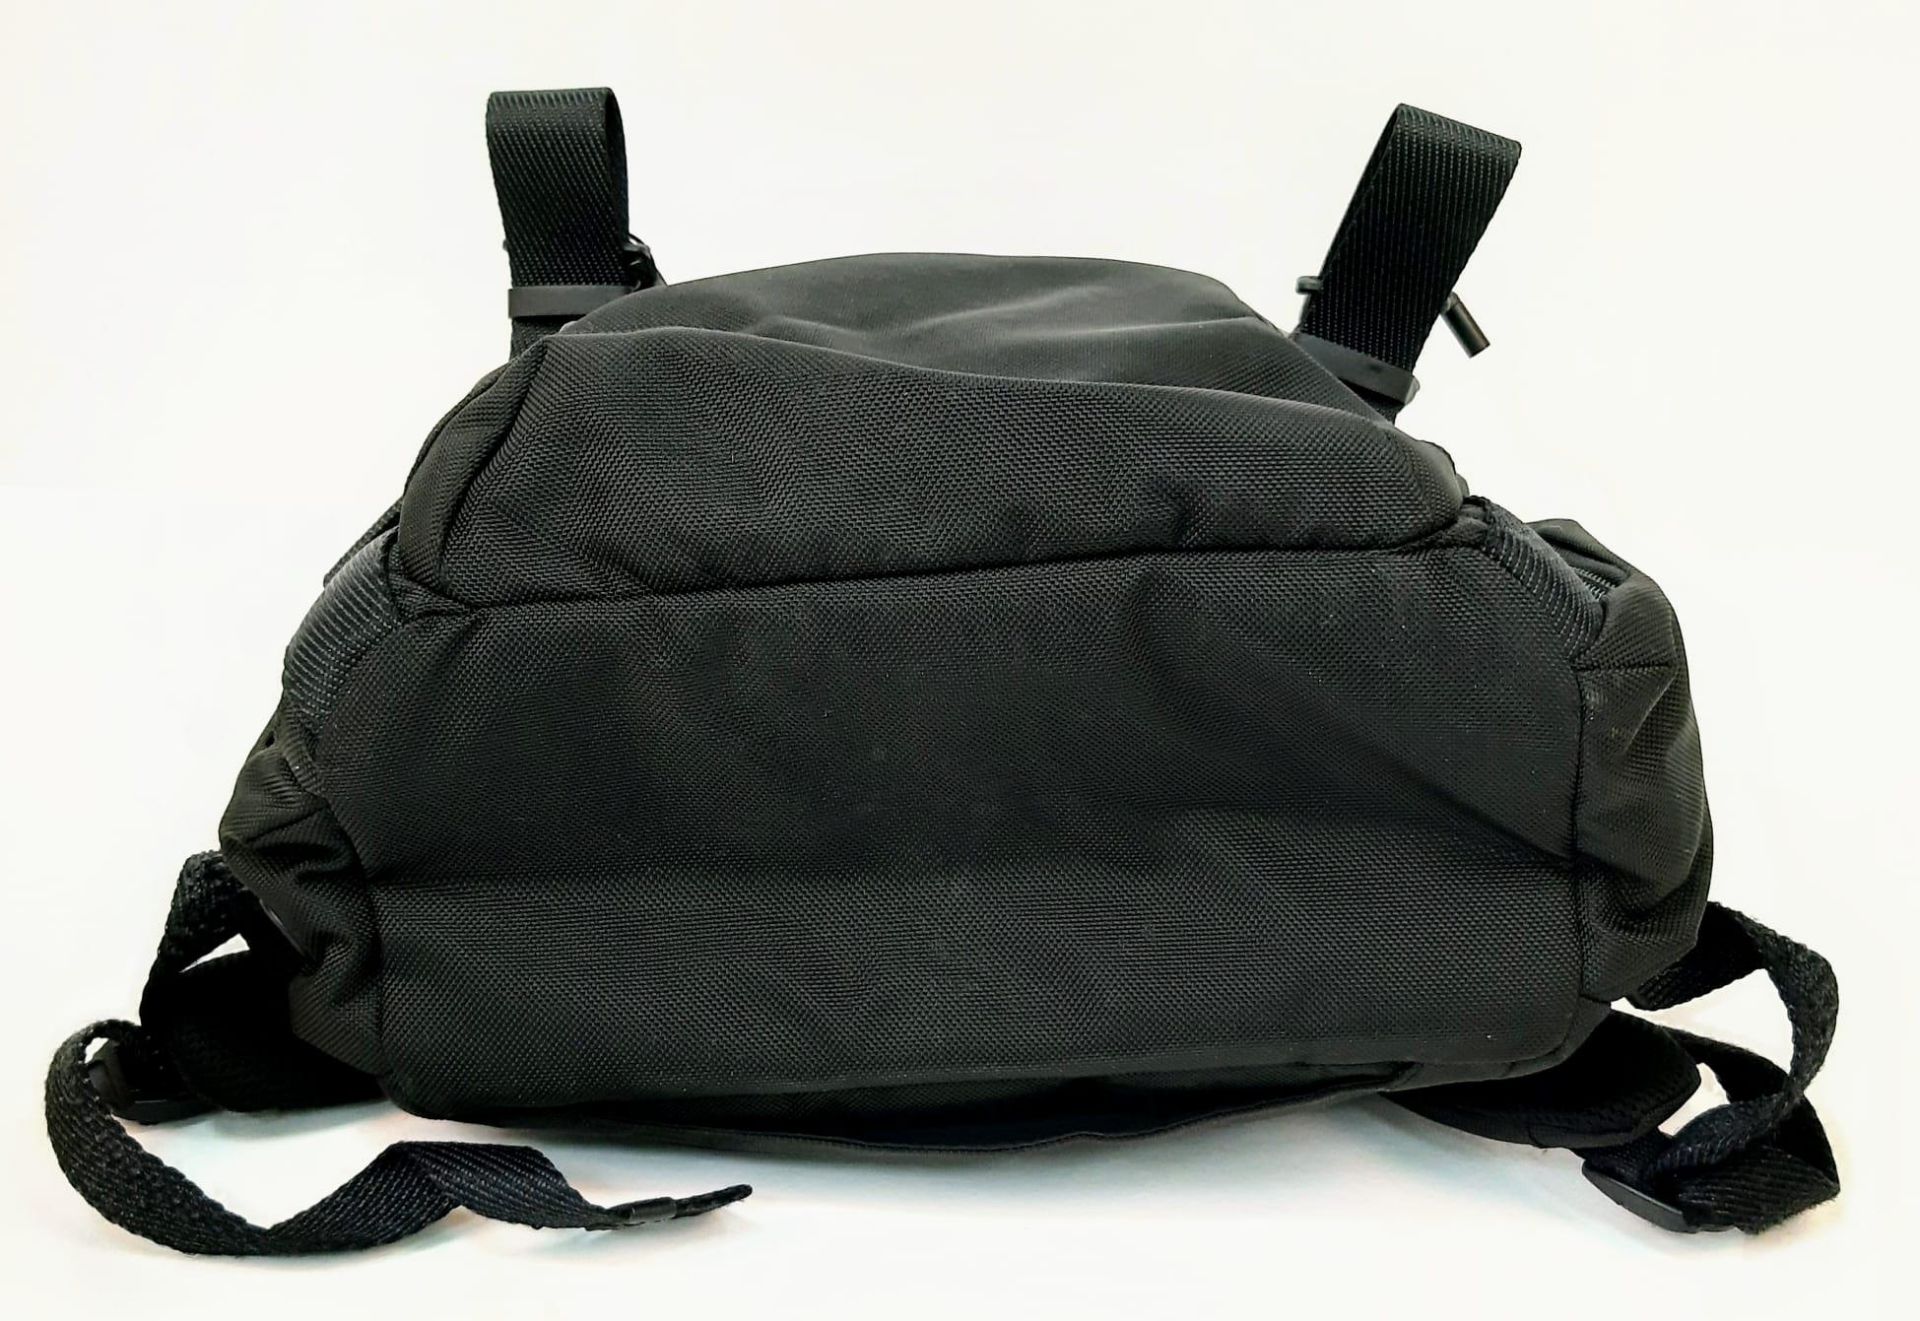 A TUMI Lark Black Backpack, 23L Capacity, Pockets for 16" Laptop, Tablet, Phone and Water Bottle. - Image 5 of 6